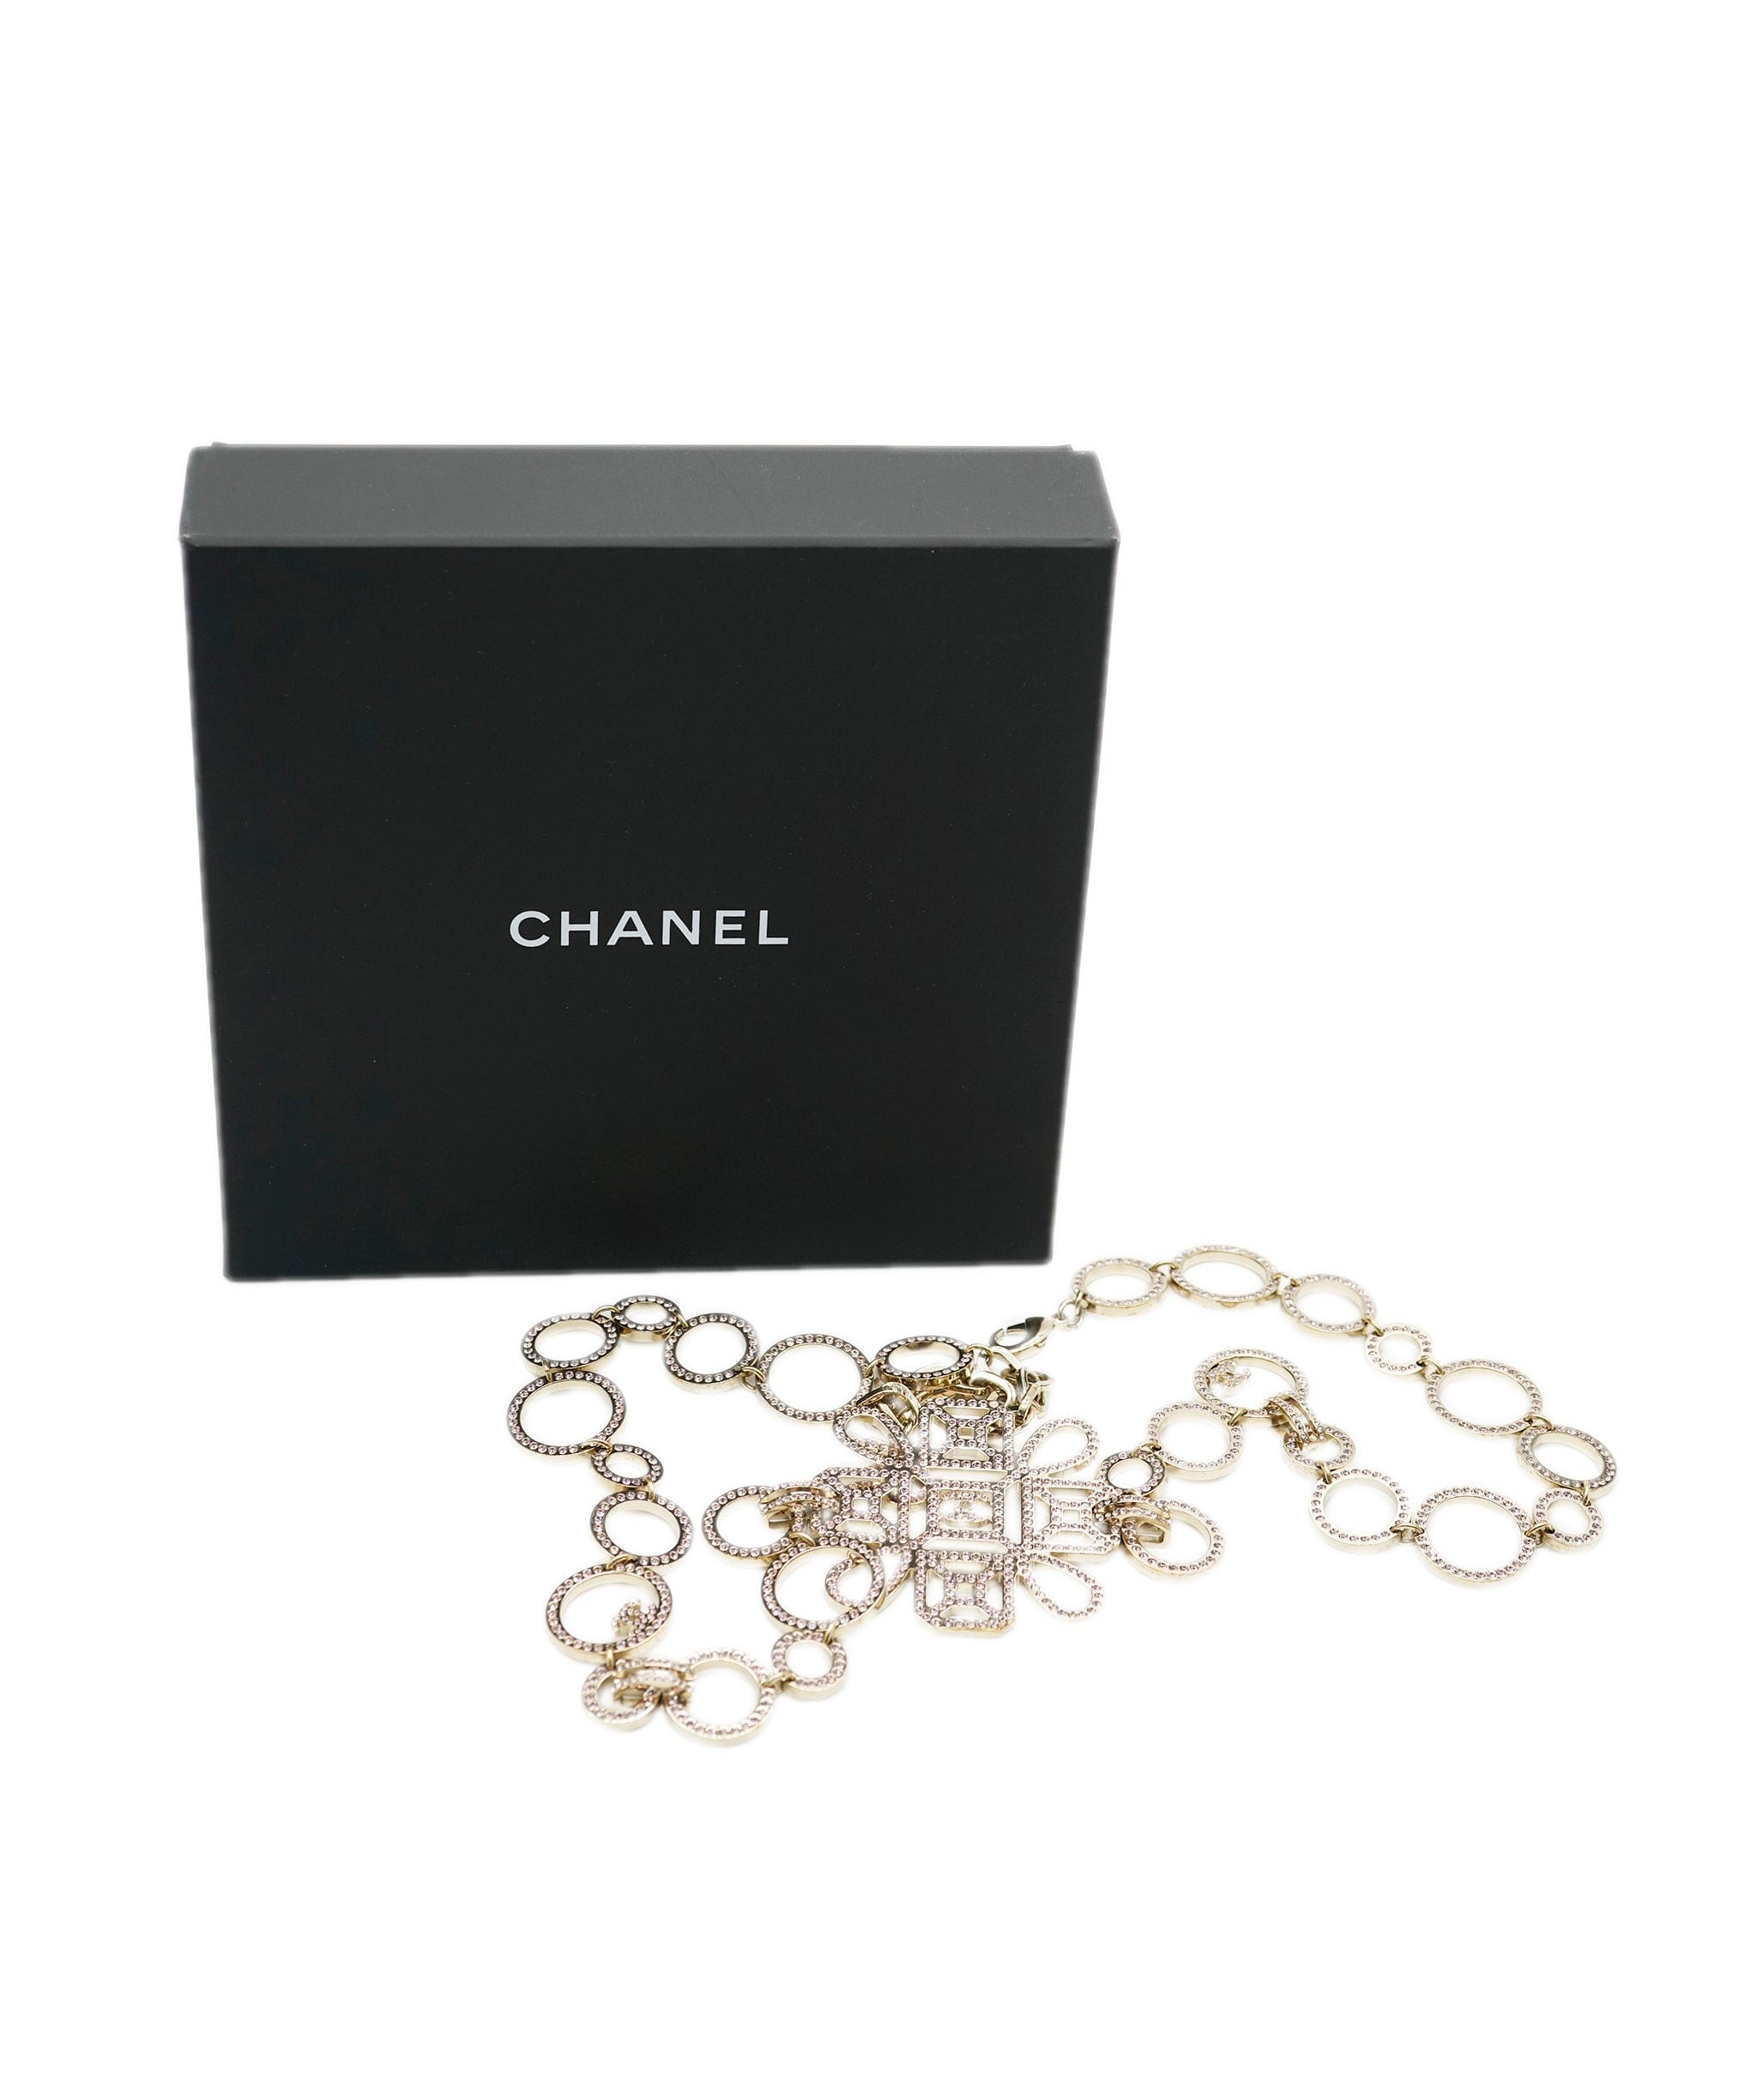 Chanel Chanel Belt Light gold with pink crystals AVC1867